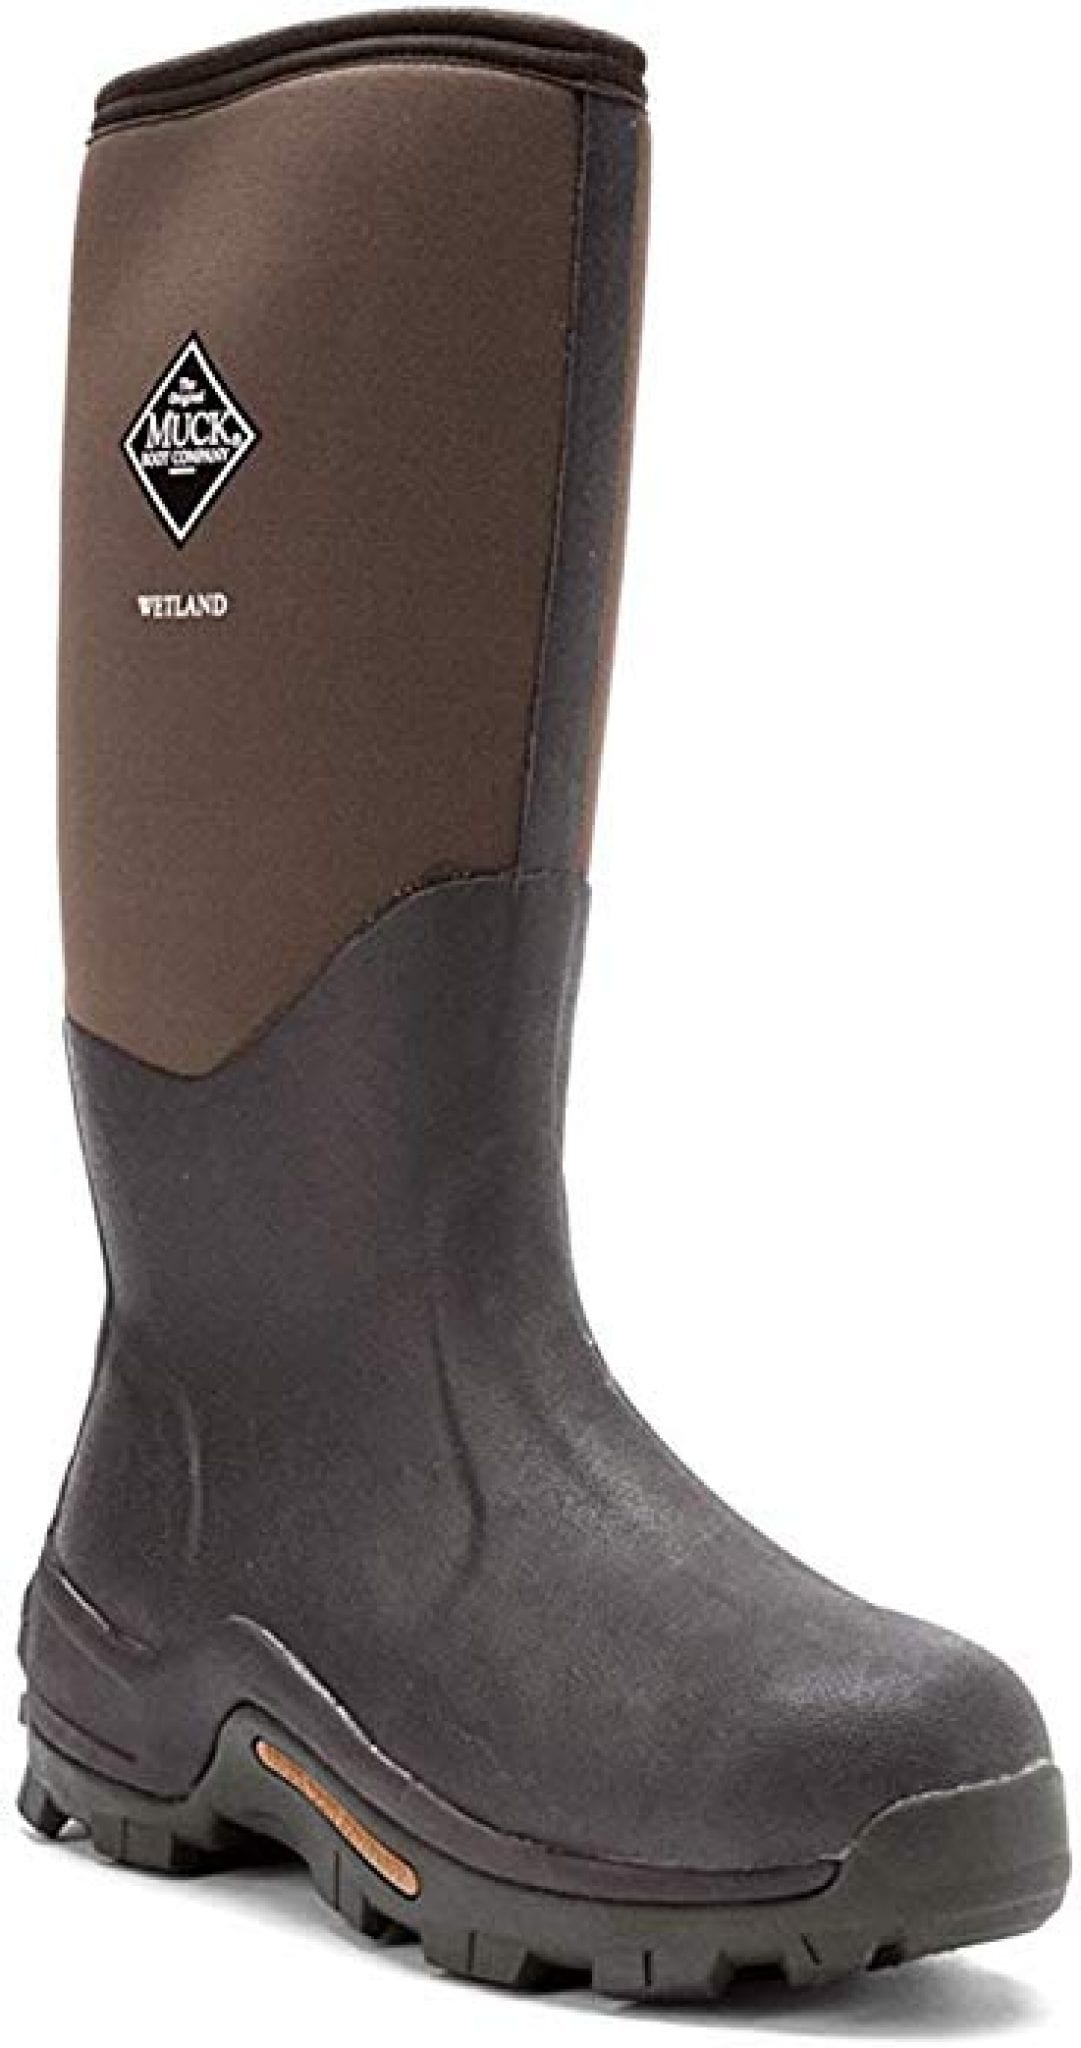 Best Knee High Rubber Hunting Boots 2021 | Top Rated Rubber Boots